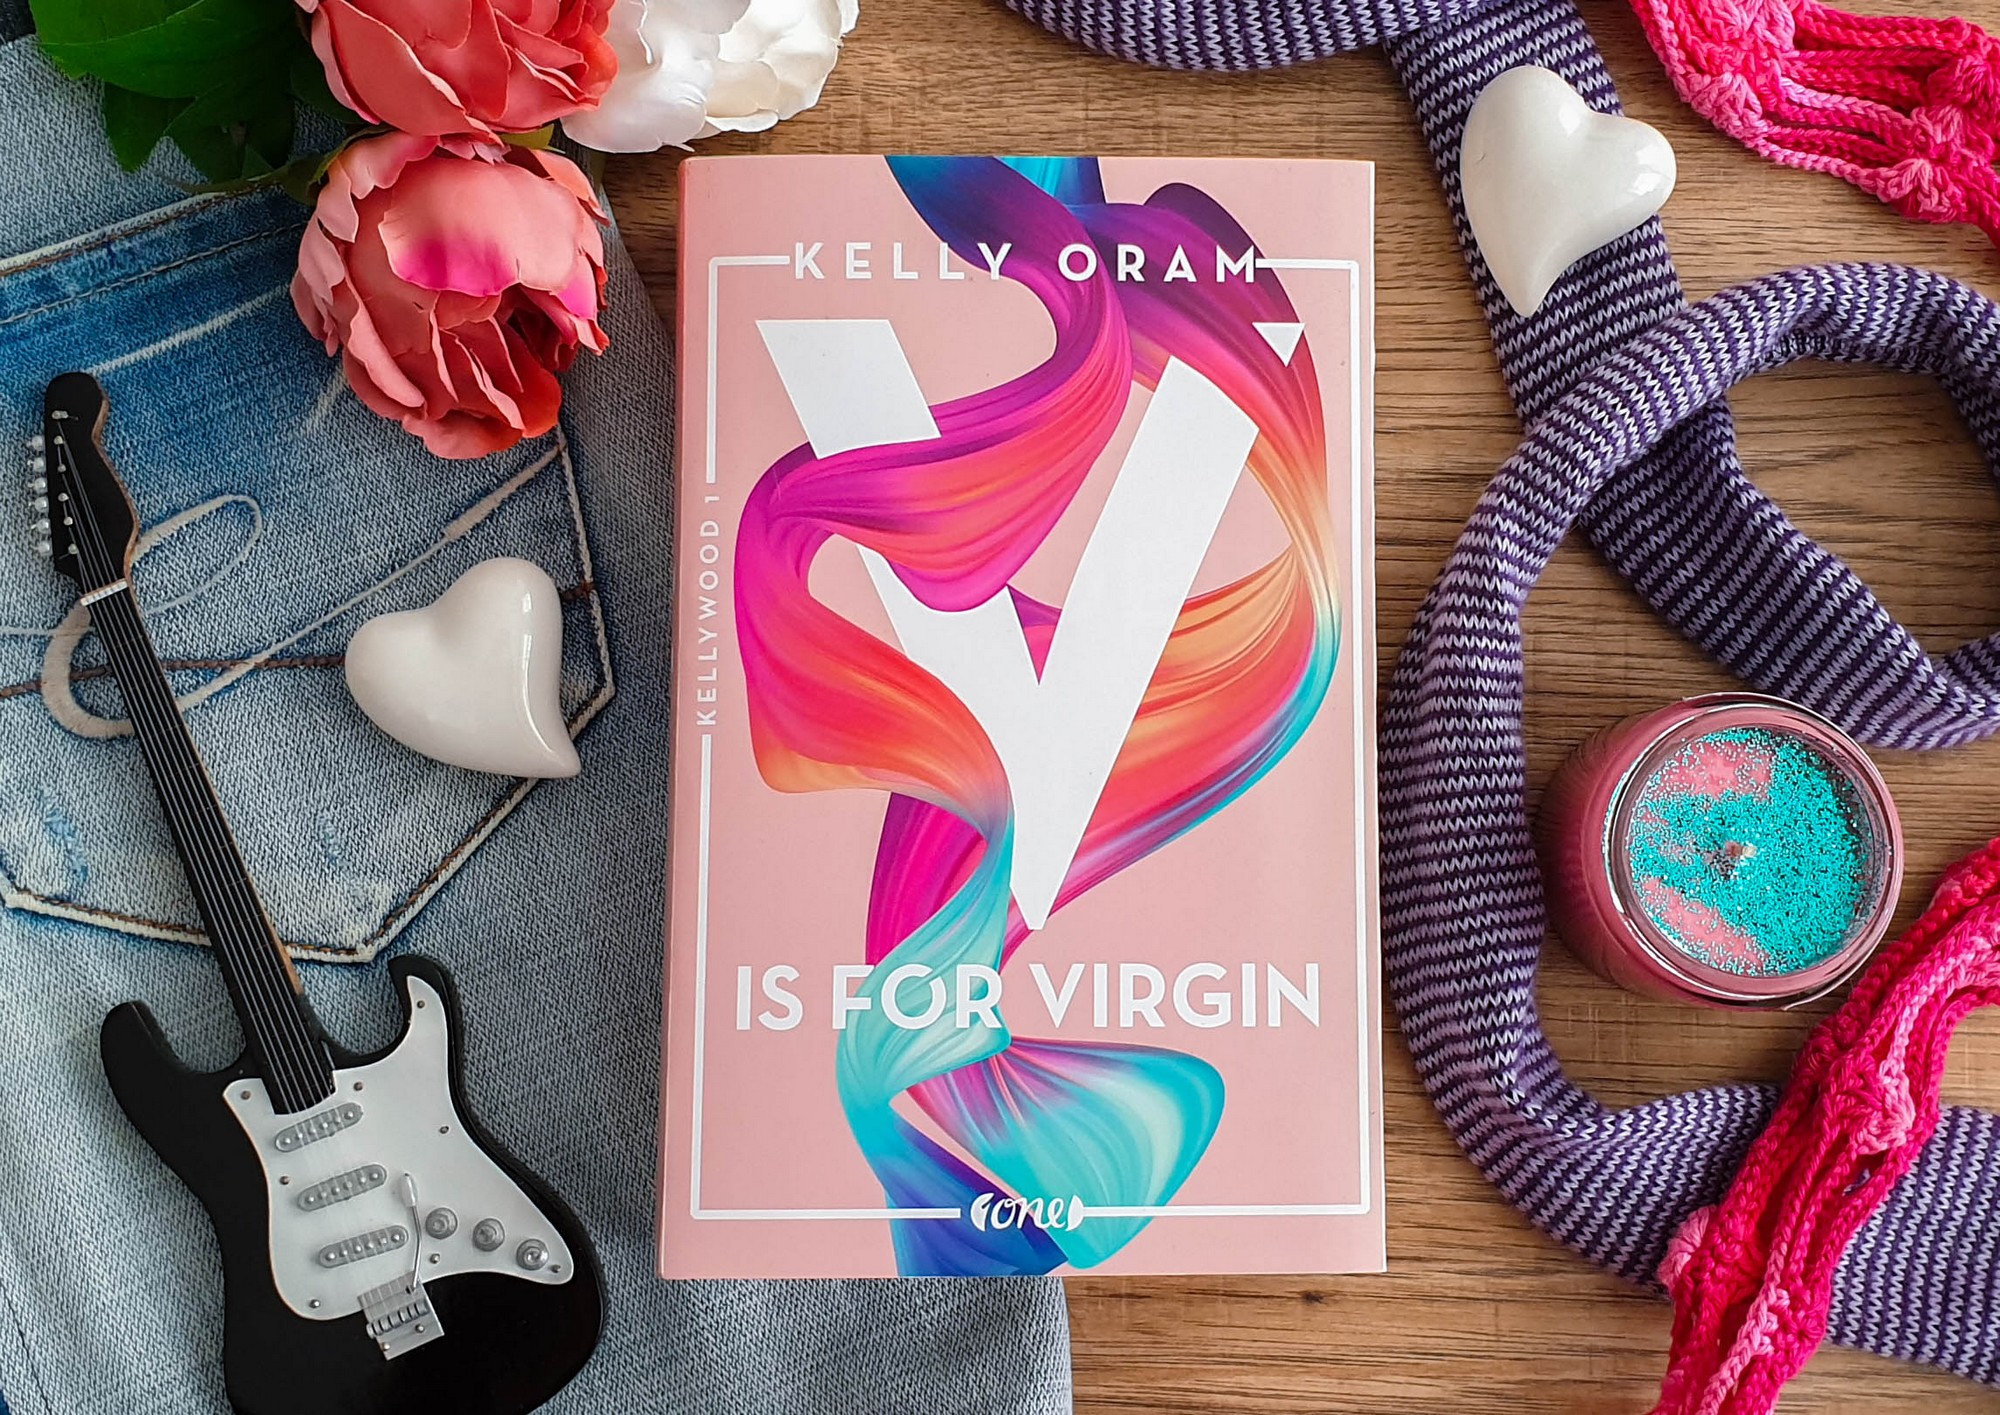 V is for Virgin – Kelly Oram graphic